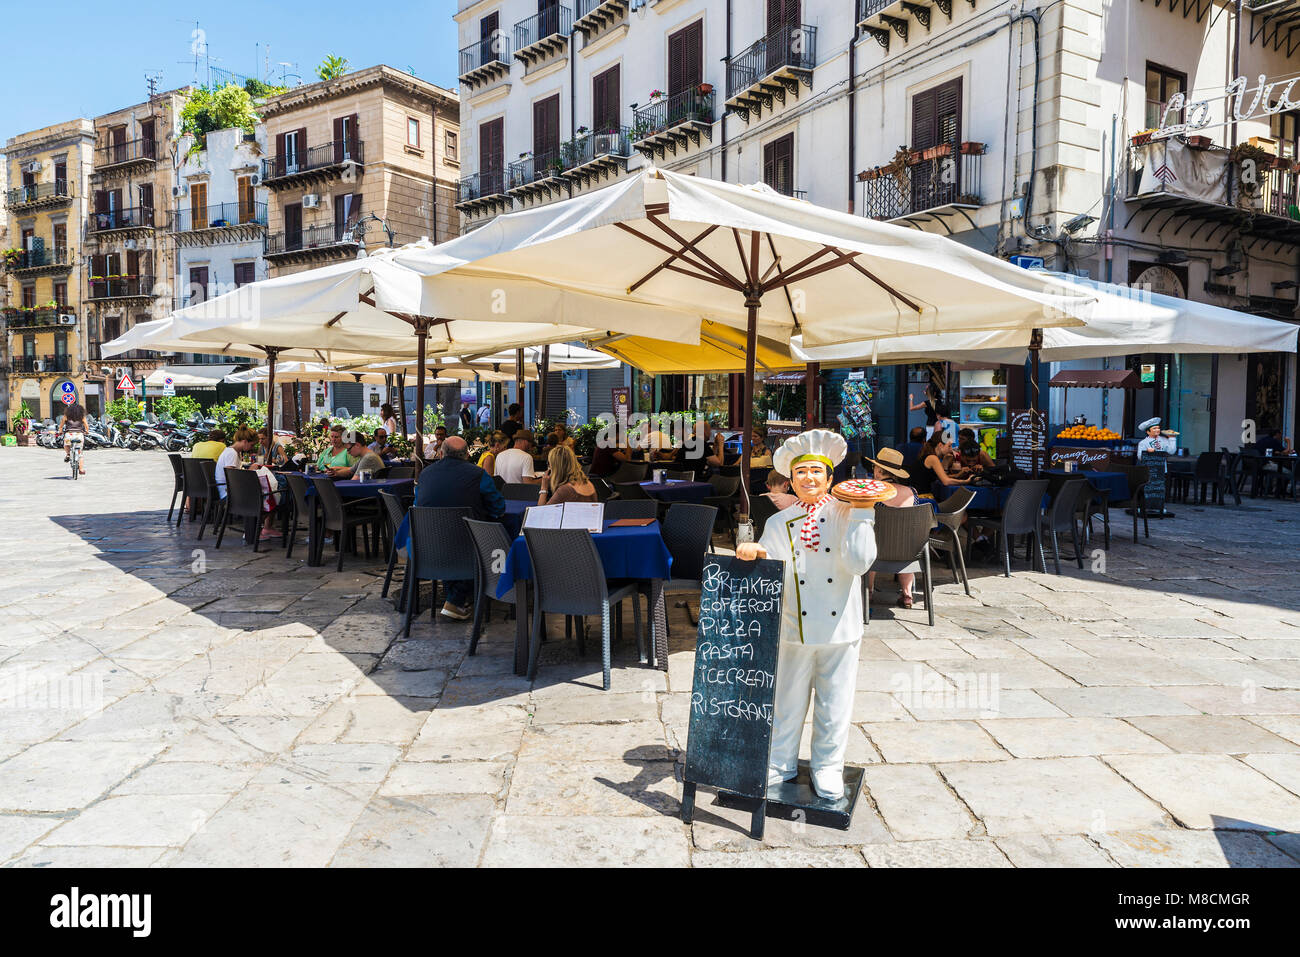 Palermo, Italy - August 10, 2017: Terrace of a restaurant bar with people around in the old town of Palermo in Sicily, Italy Stock Photo